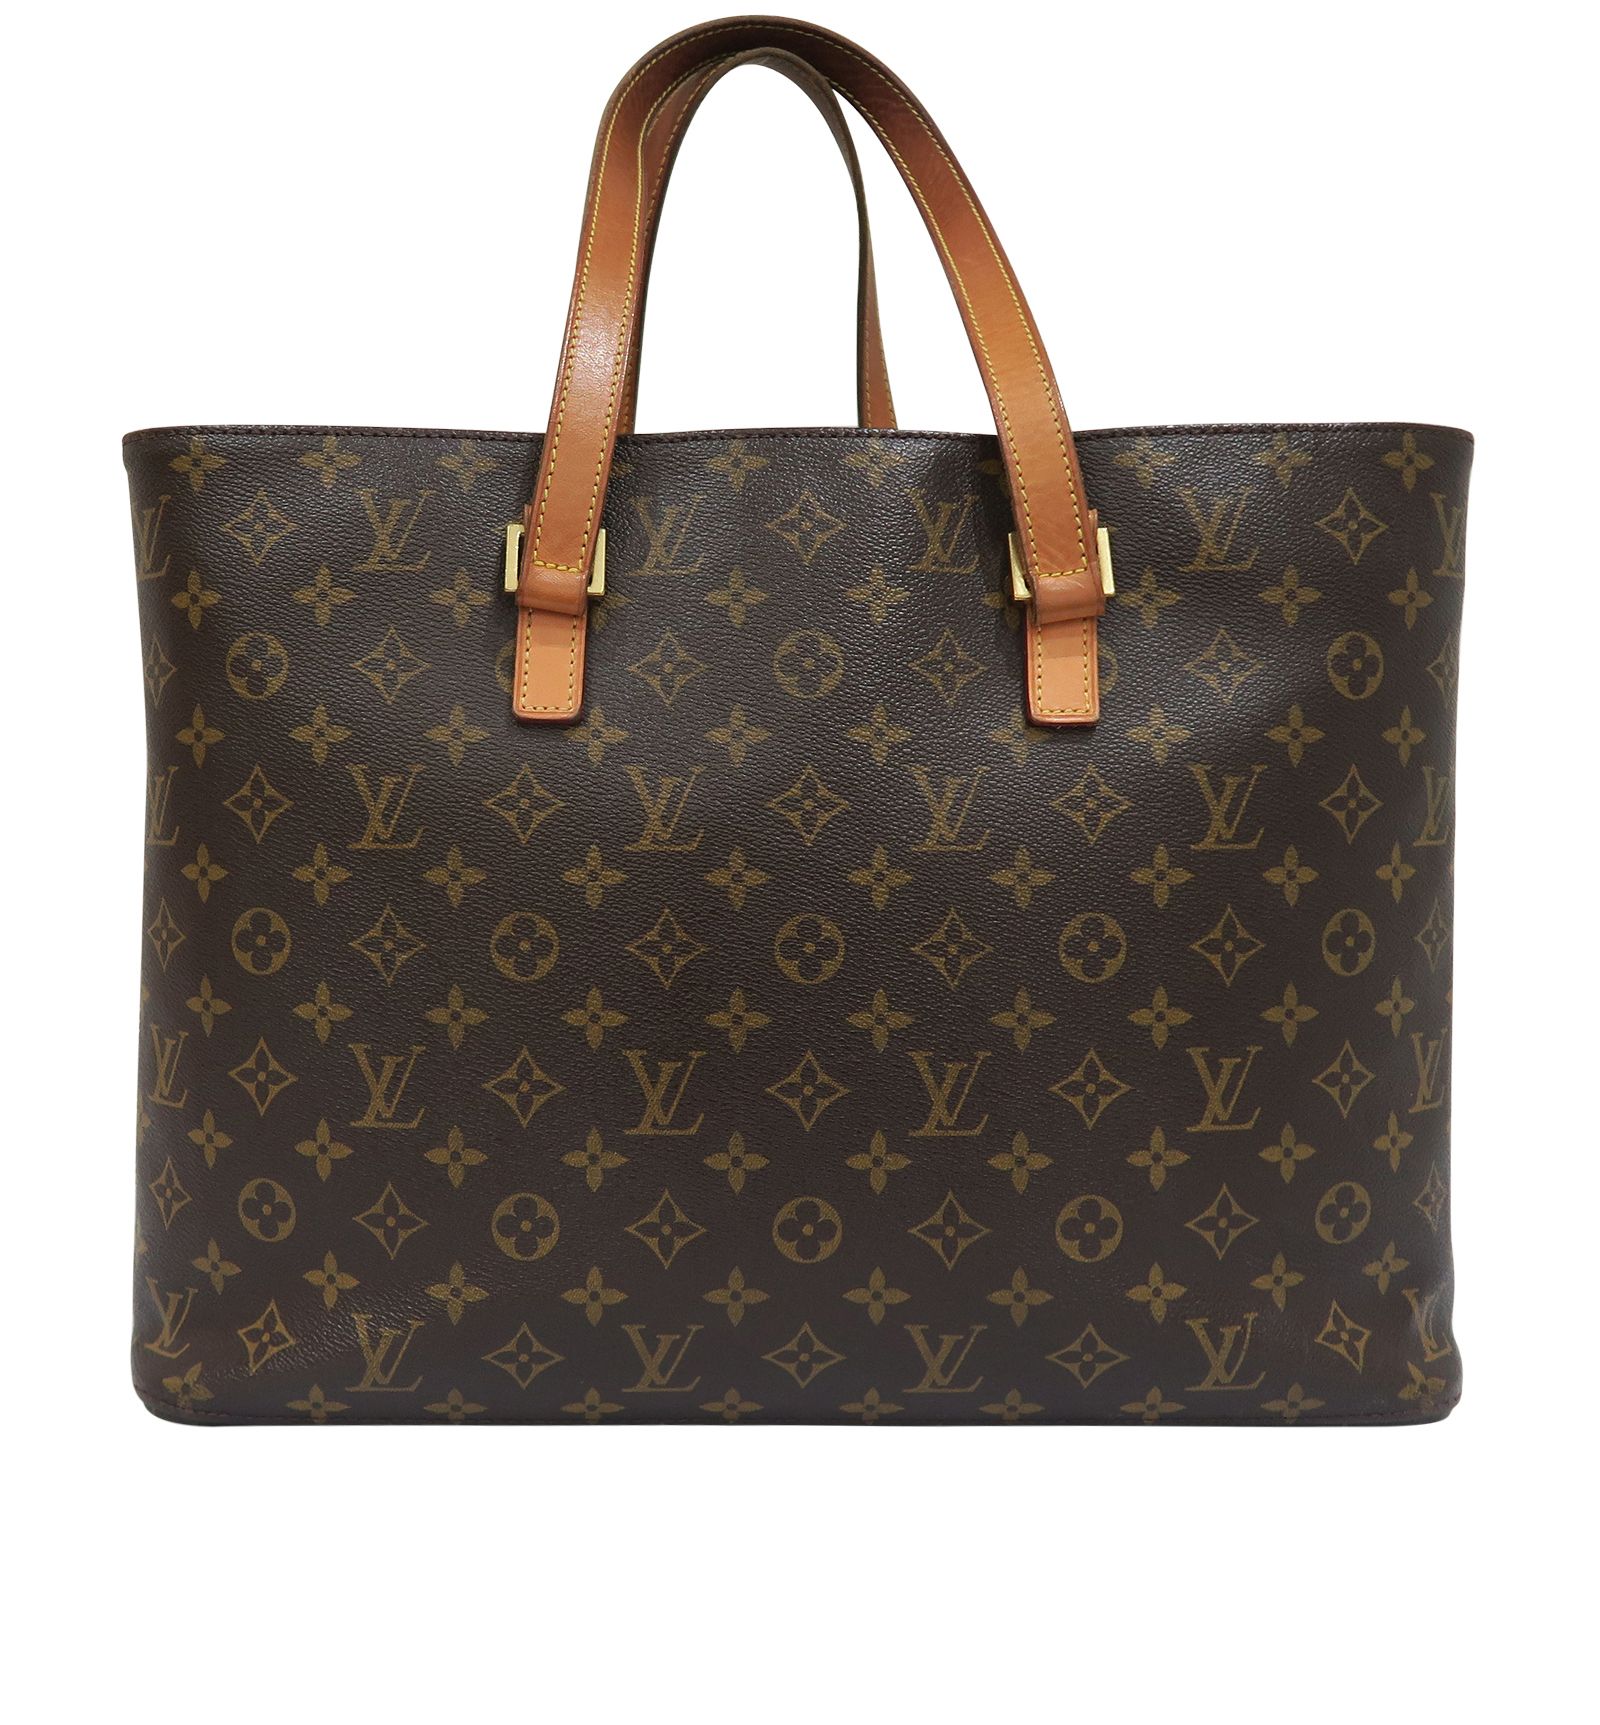 Designer Exchange Ltd - This Louis Vuitton Luco Tote will definitely get  you through any occasion in 2021 👜 Live to browse on  www.designerexchange.ie/products/monogram-luco?_pos=1&_sid=88da865f6&_ss=r  🛍️